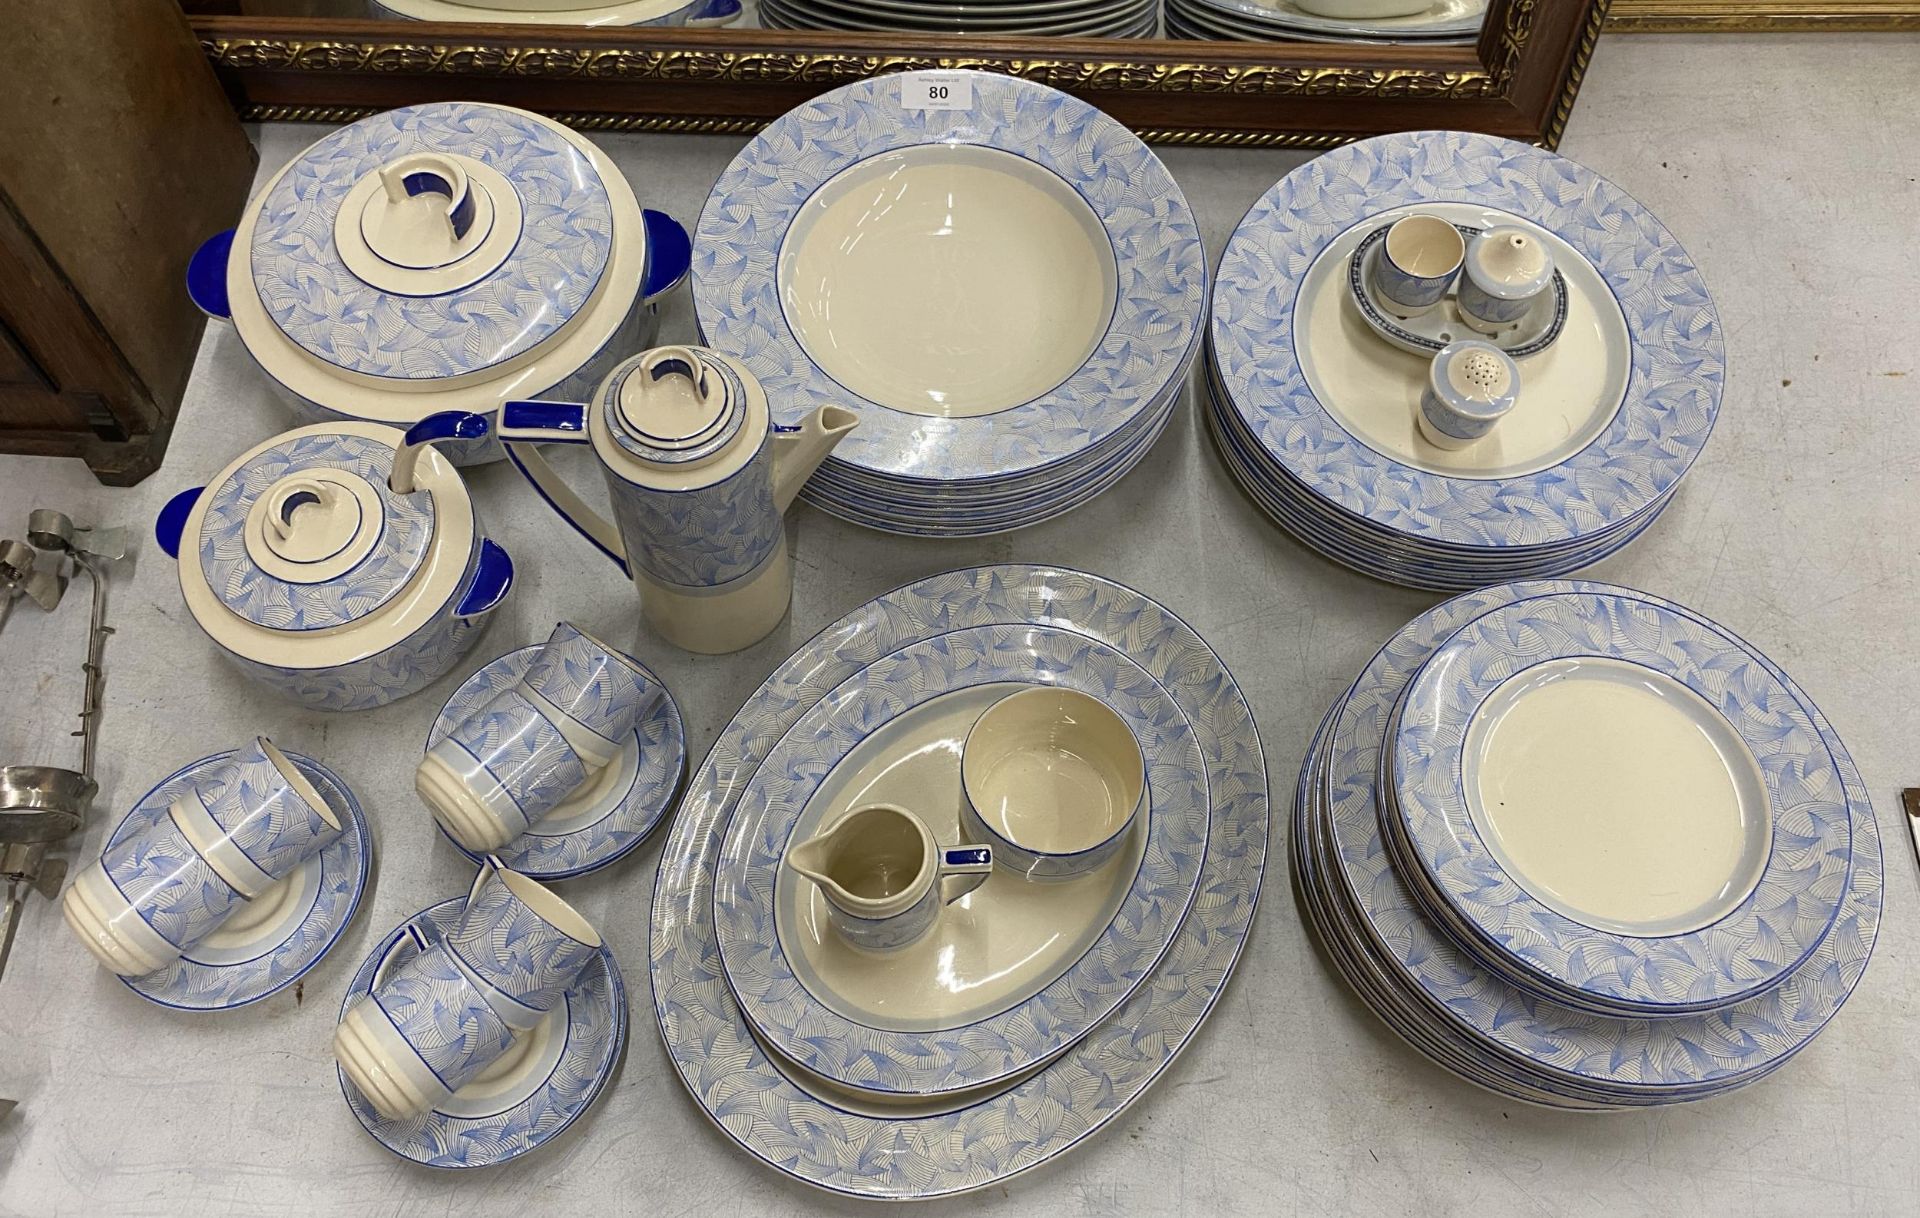 A FIFTY FIVE PIECE ART DECO 1920/1930'S ROYAL DOULTON 'ENVOY' PATTERN BLUE AND WHITE DINNER SERVICE